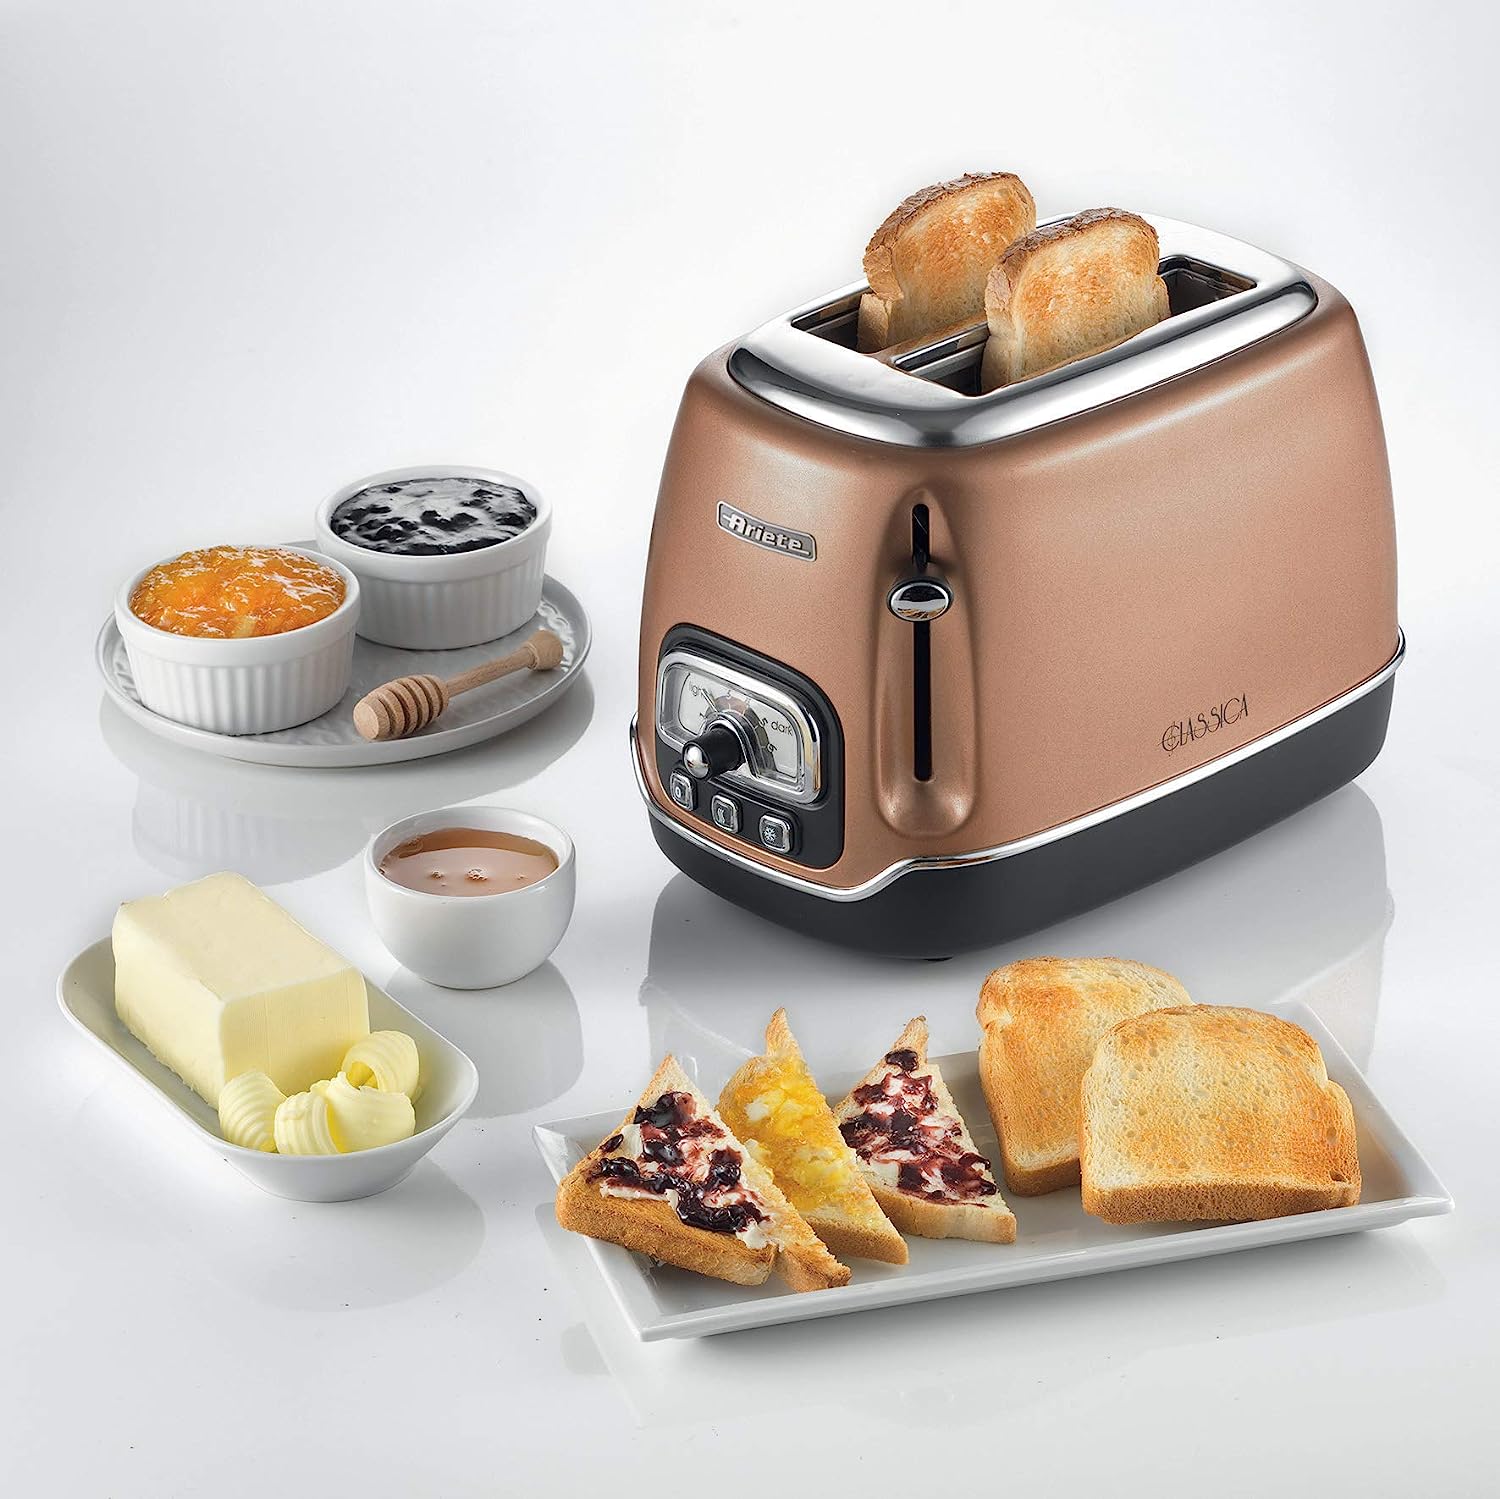 Ariete Tostapane Classica 158/38, Electric Toaster 2 Slices, Without Tongs,  815 W, 3 Functions, 6